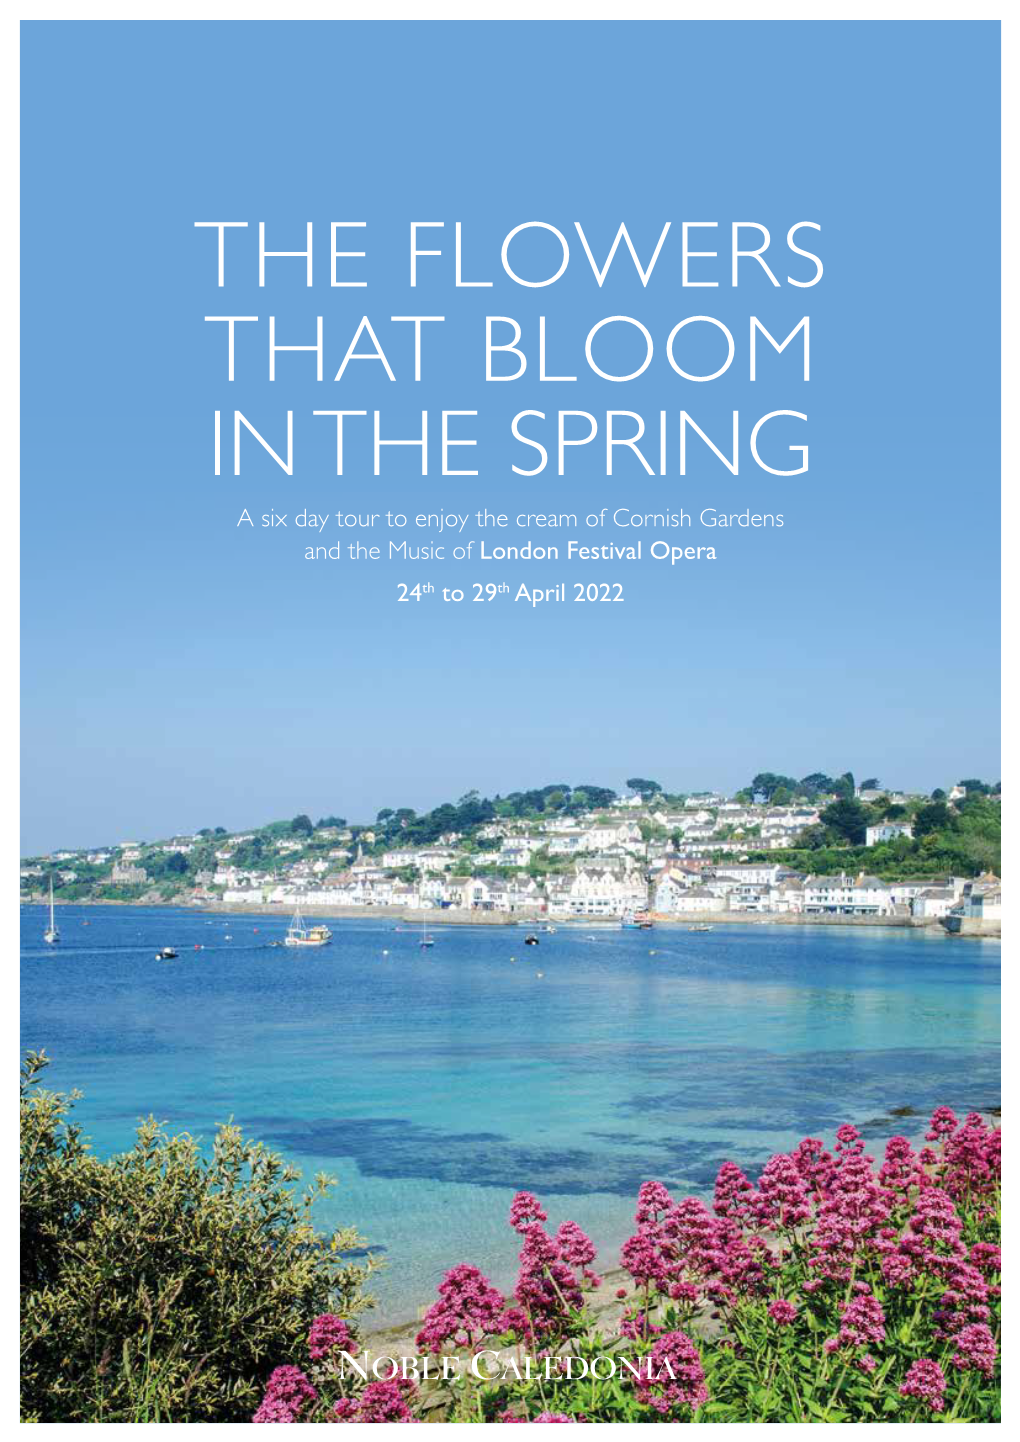 THE FLOWERS THAT BLOOM in the SPRING a Six Day Tour to Enjoy the Cream of Cornish Gardens and the Music of London Festival Opera 24Th to 29Th April 2022 St Mawes